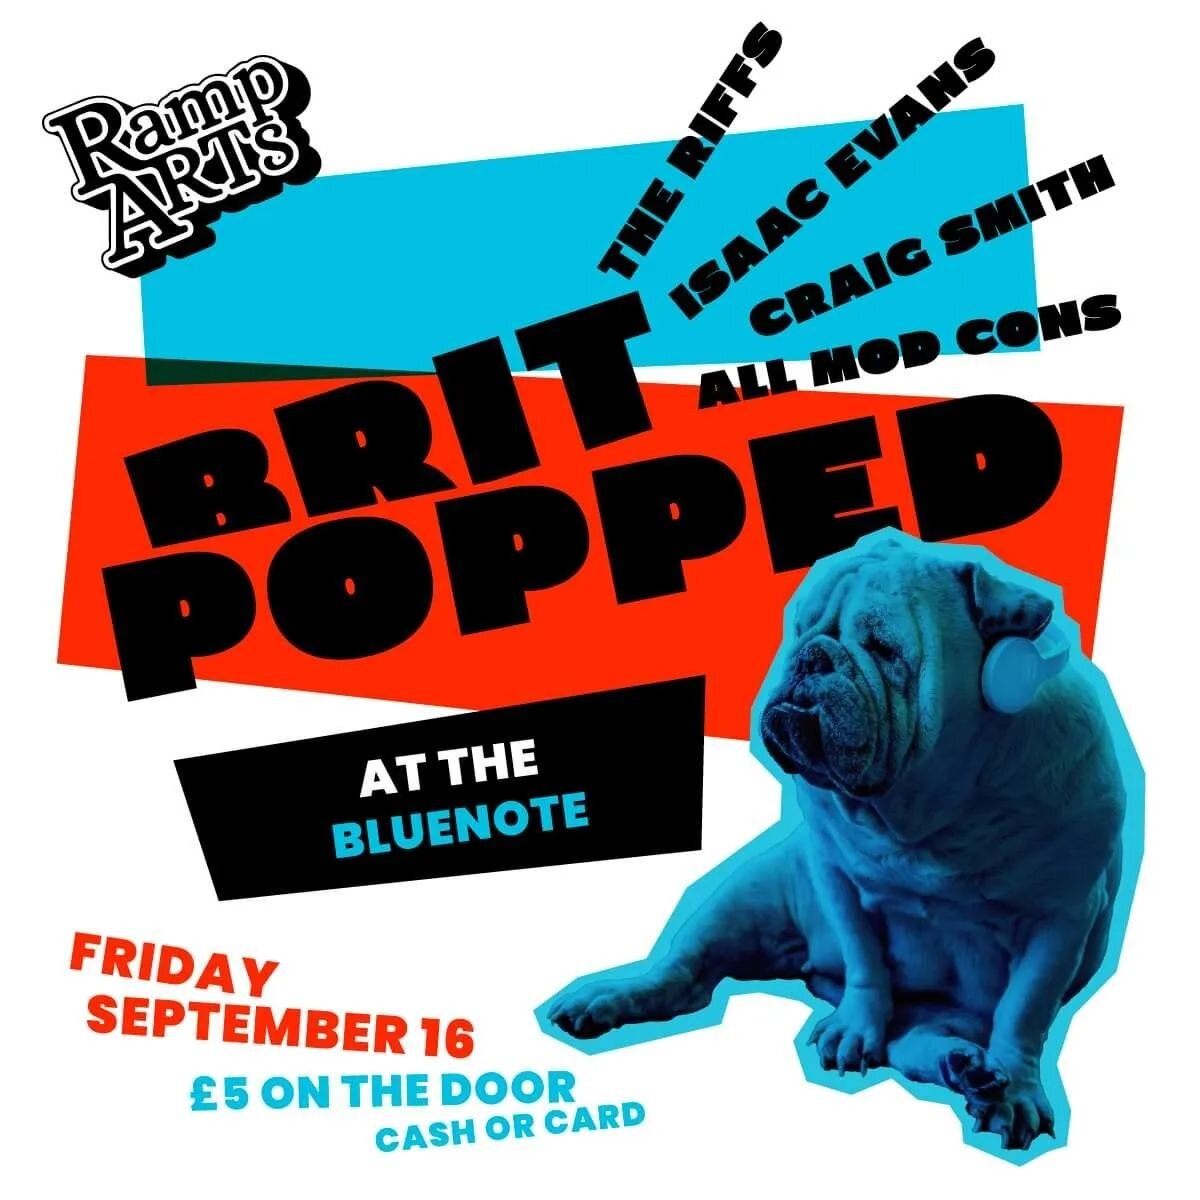 invites you to party like it&rsquo;s 1995 at @bluenotejsy on Friday 16 September from 7 pm!

@stephenpaulorr of All Mod Cons will be playing the likes of Suede, Blur, Pulp, Stone Roses, Sleeper, Garbage, Ash, Oasis, Shed 7, Supergrass between all act